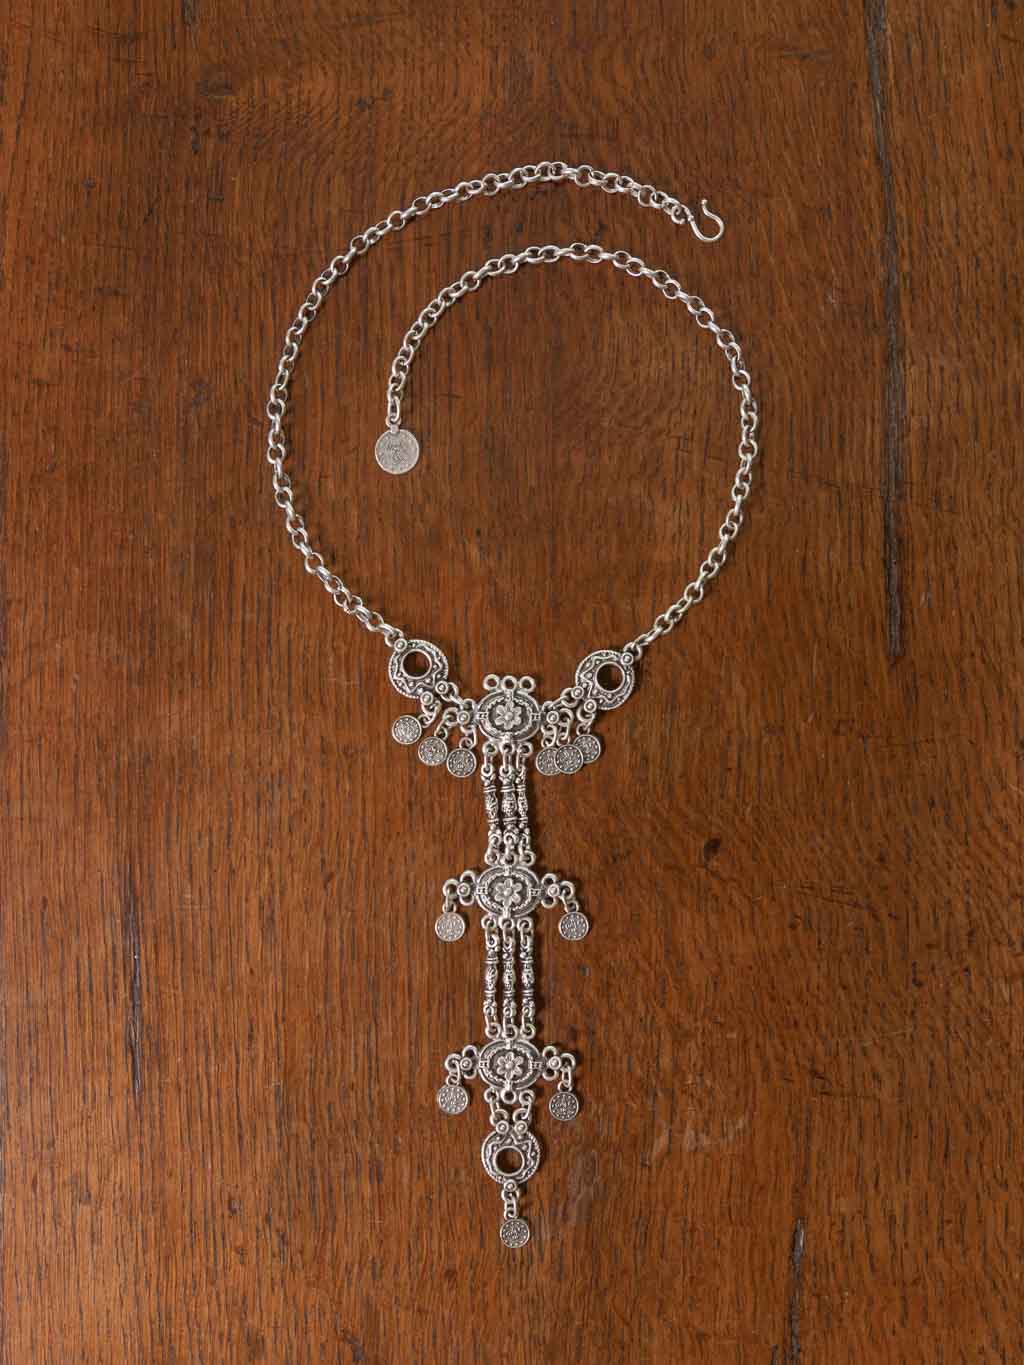 Fina Necklace - a long adjustable chain necklace with flower emblems that drape from the neckline